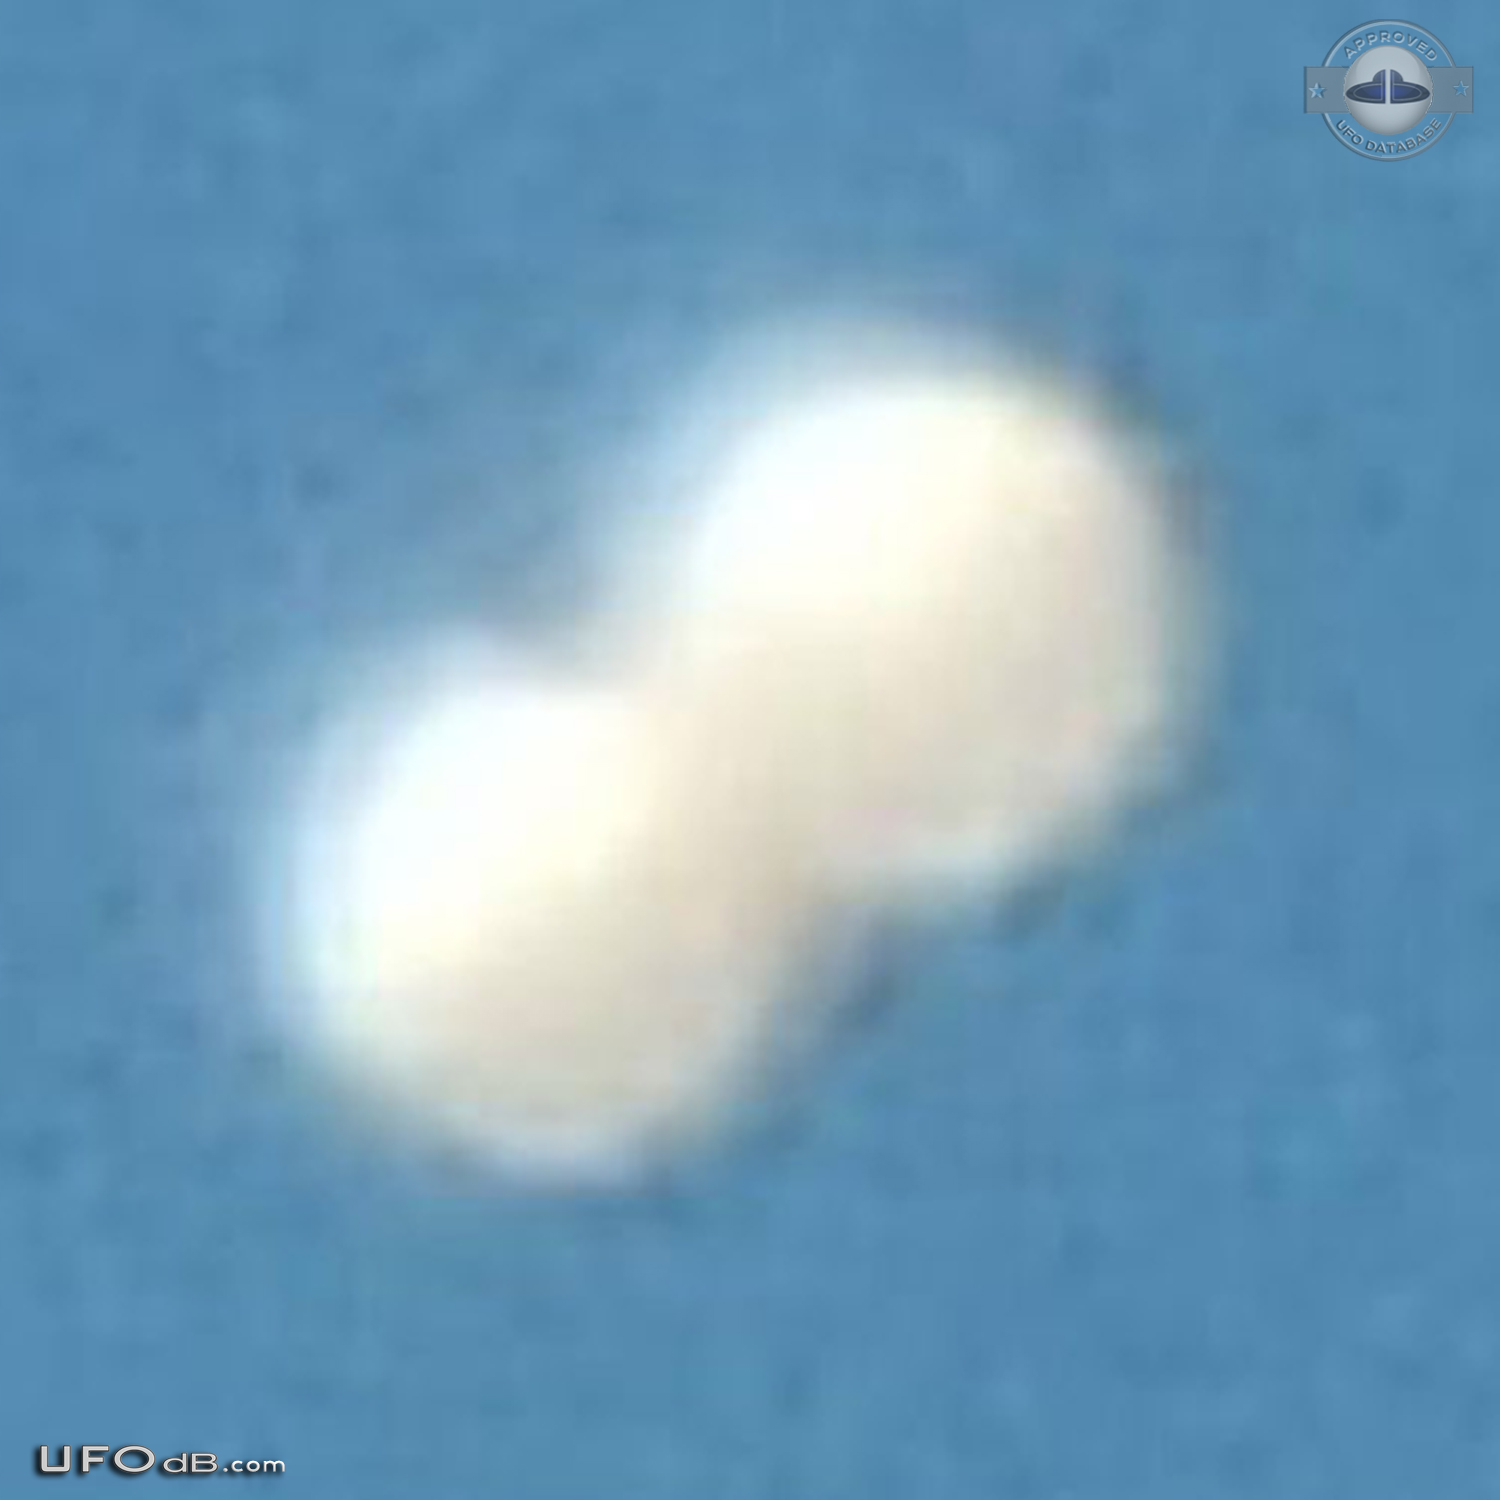 Twin sphere UFO caught on picture over Bradford west Yorkshire UK 2012 UFO Picture #486-3